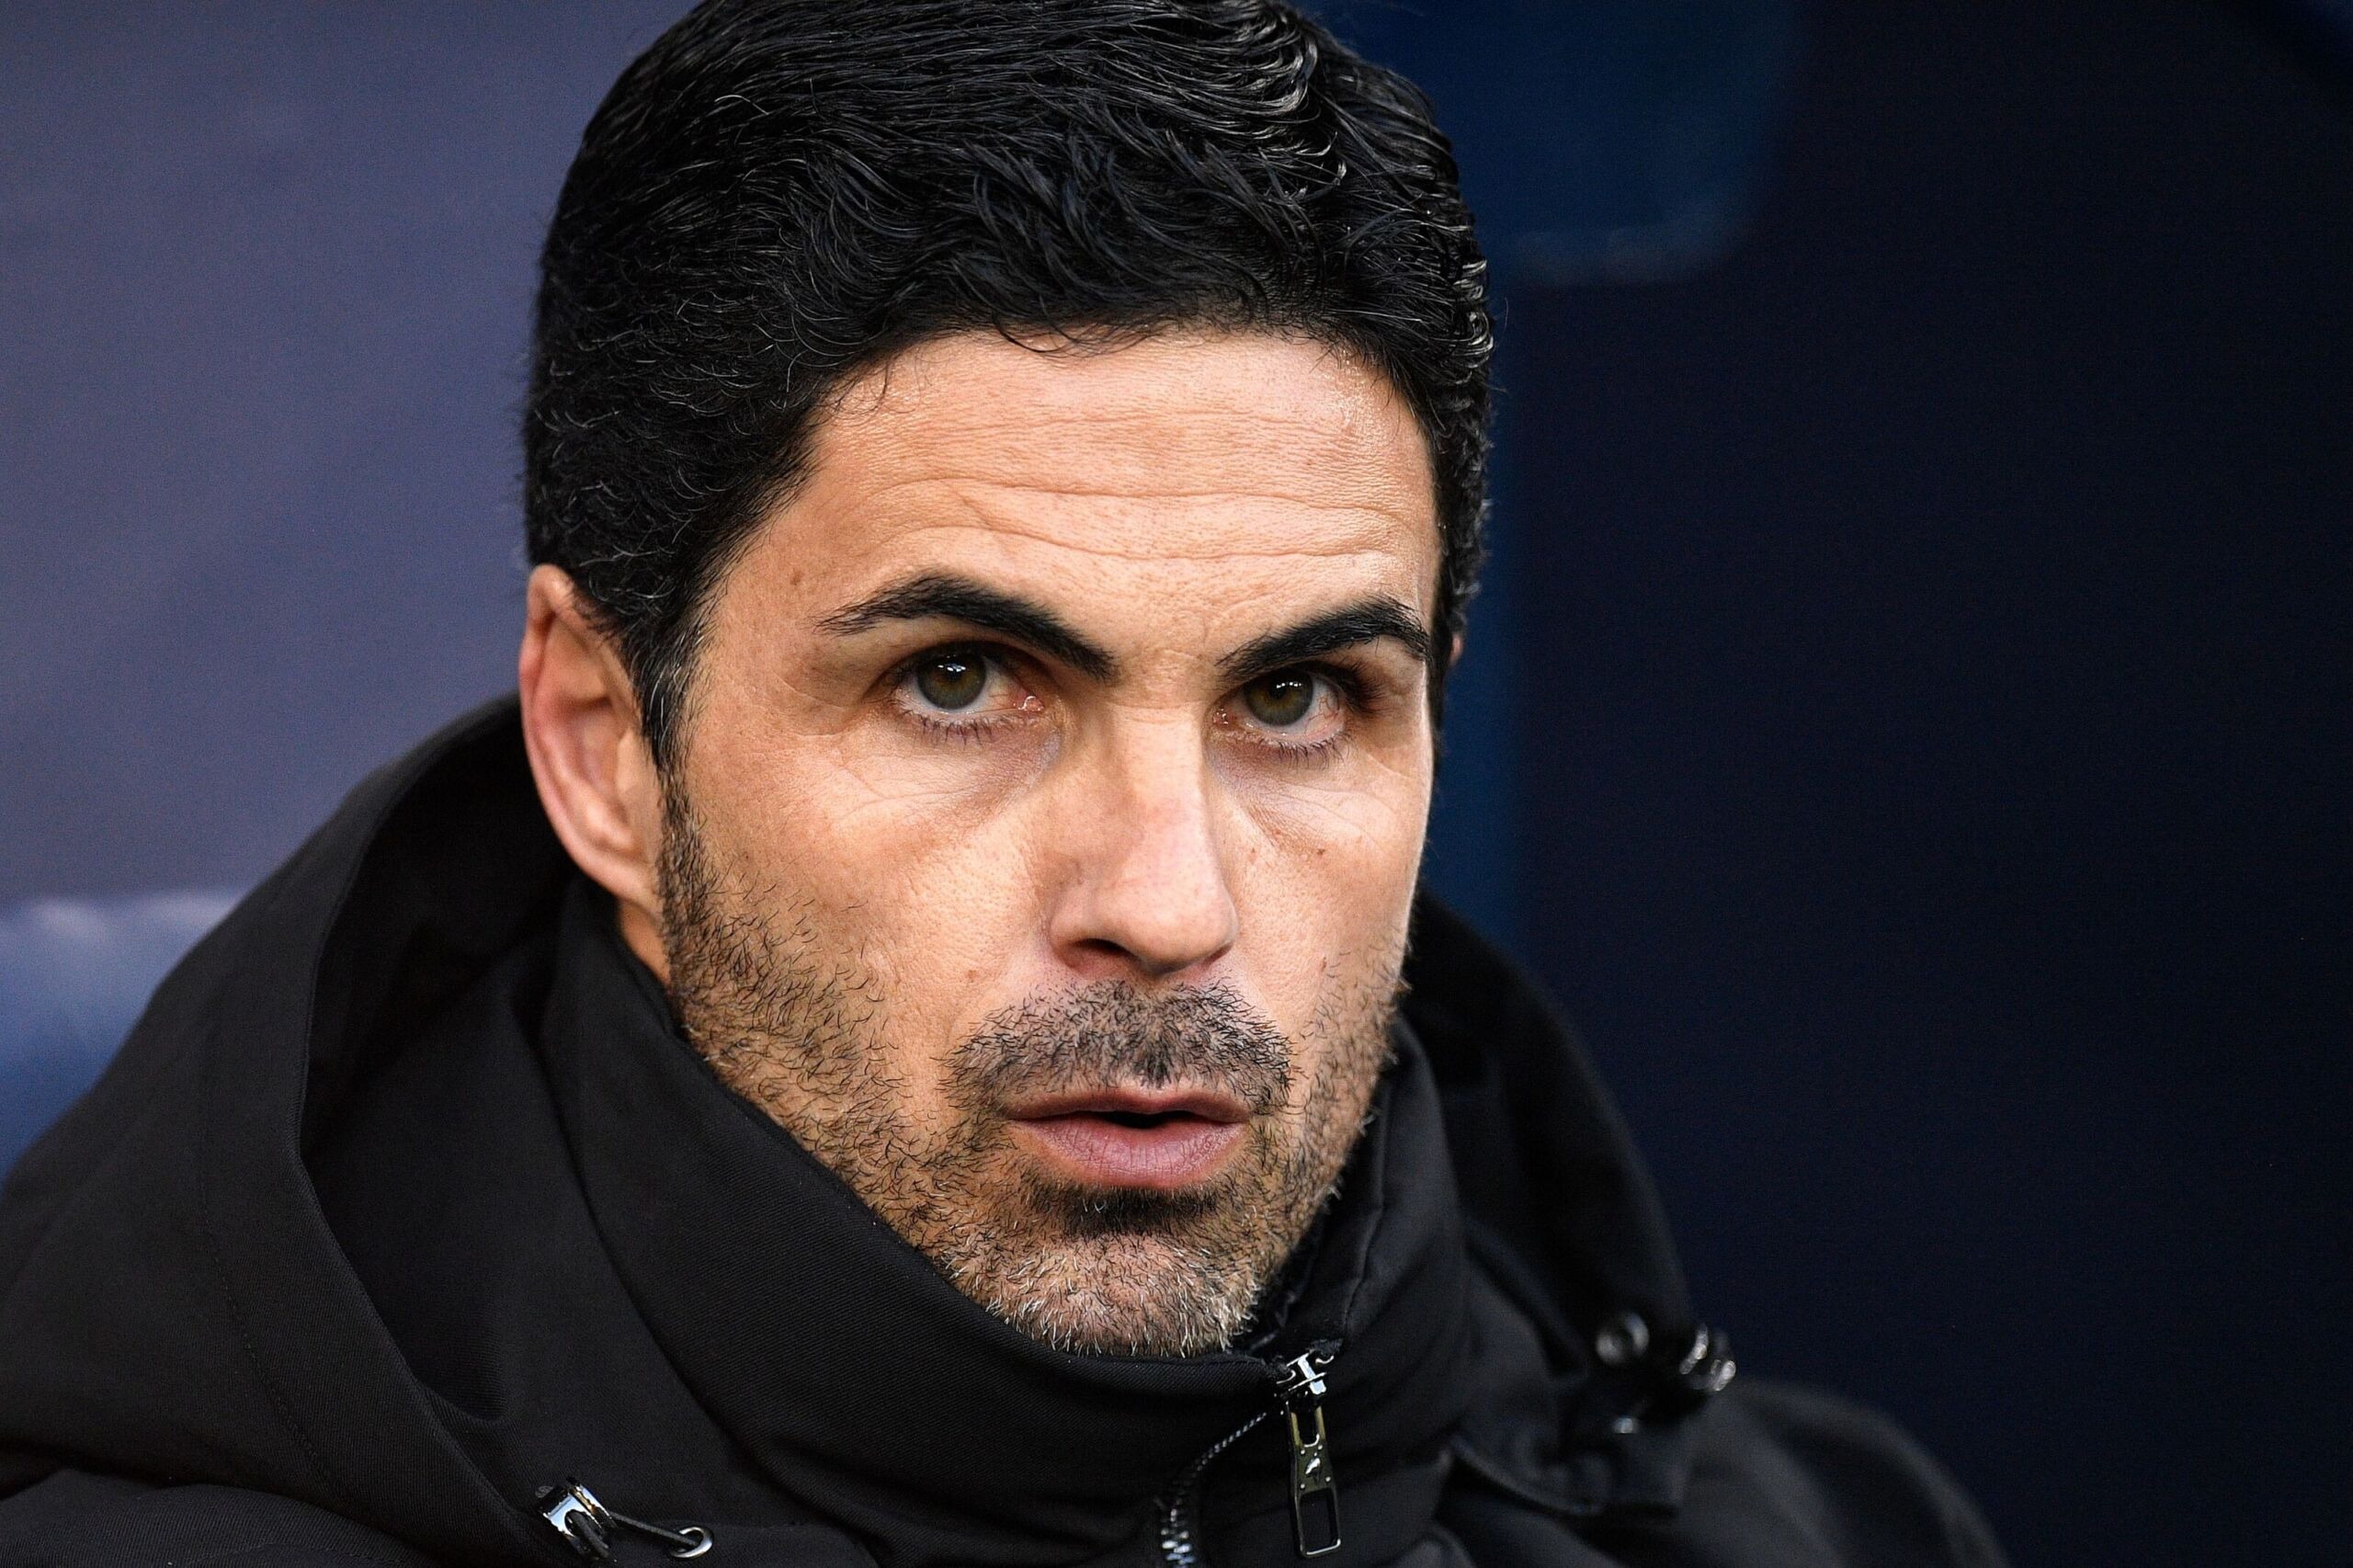 Arteta Talks About an Arsenal Player Who Doesn't Play Much But Earns £55,000 Every Week